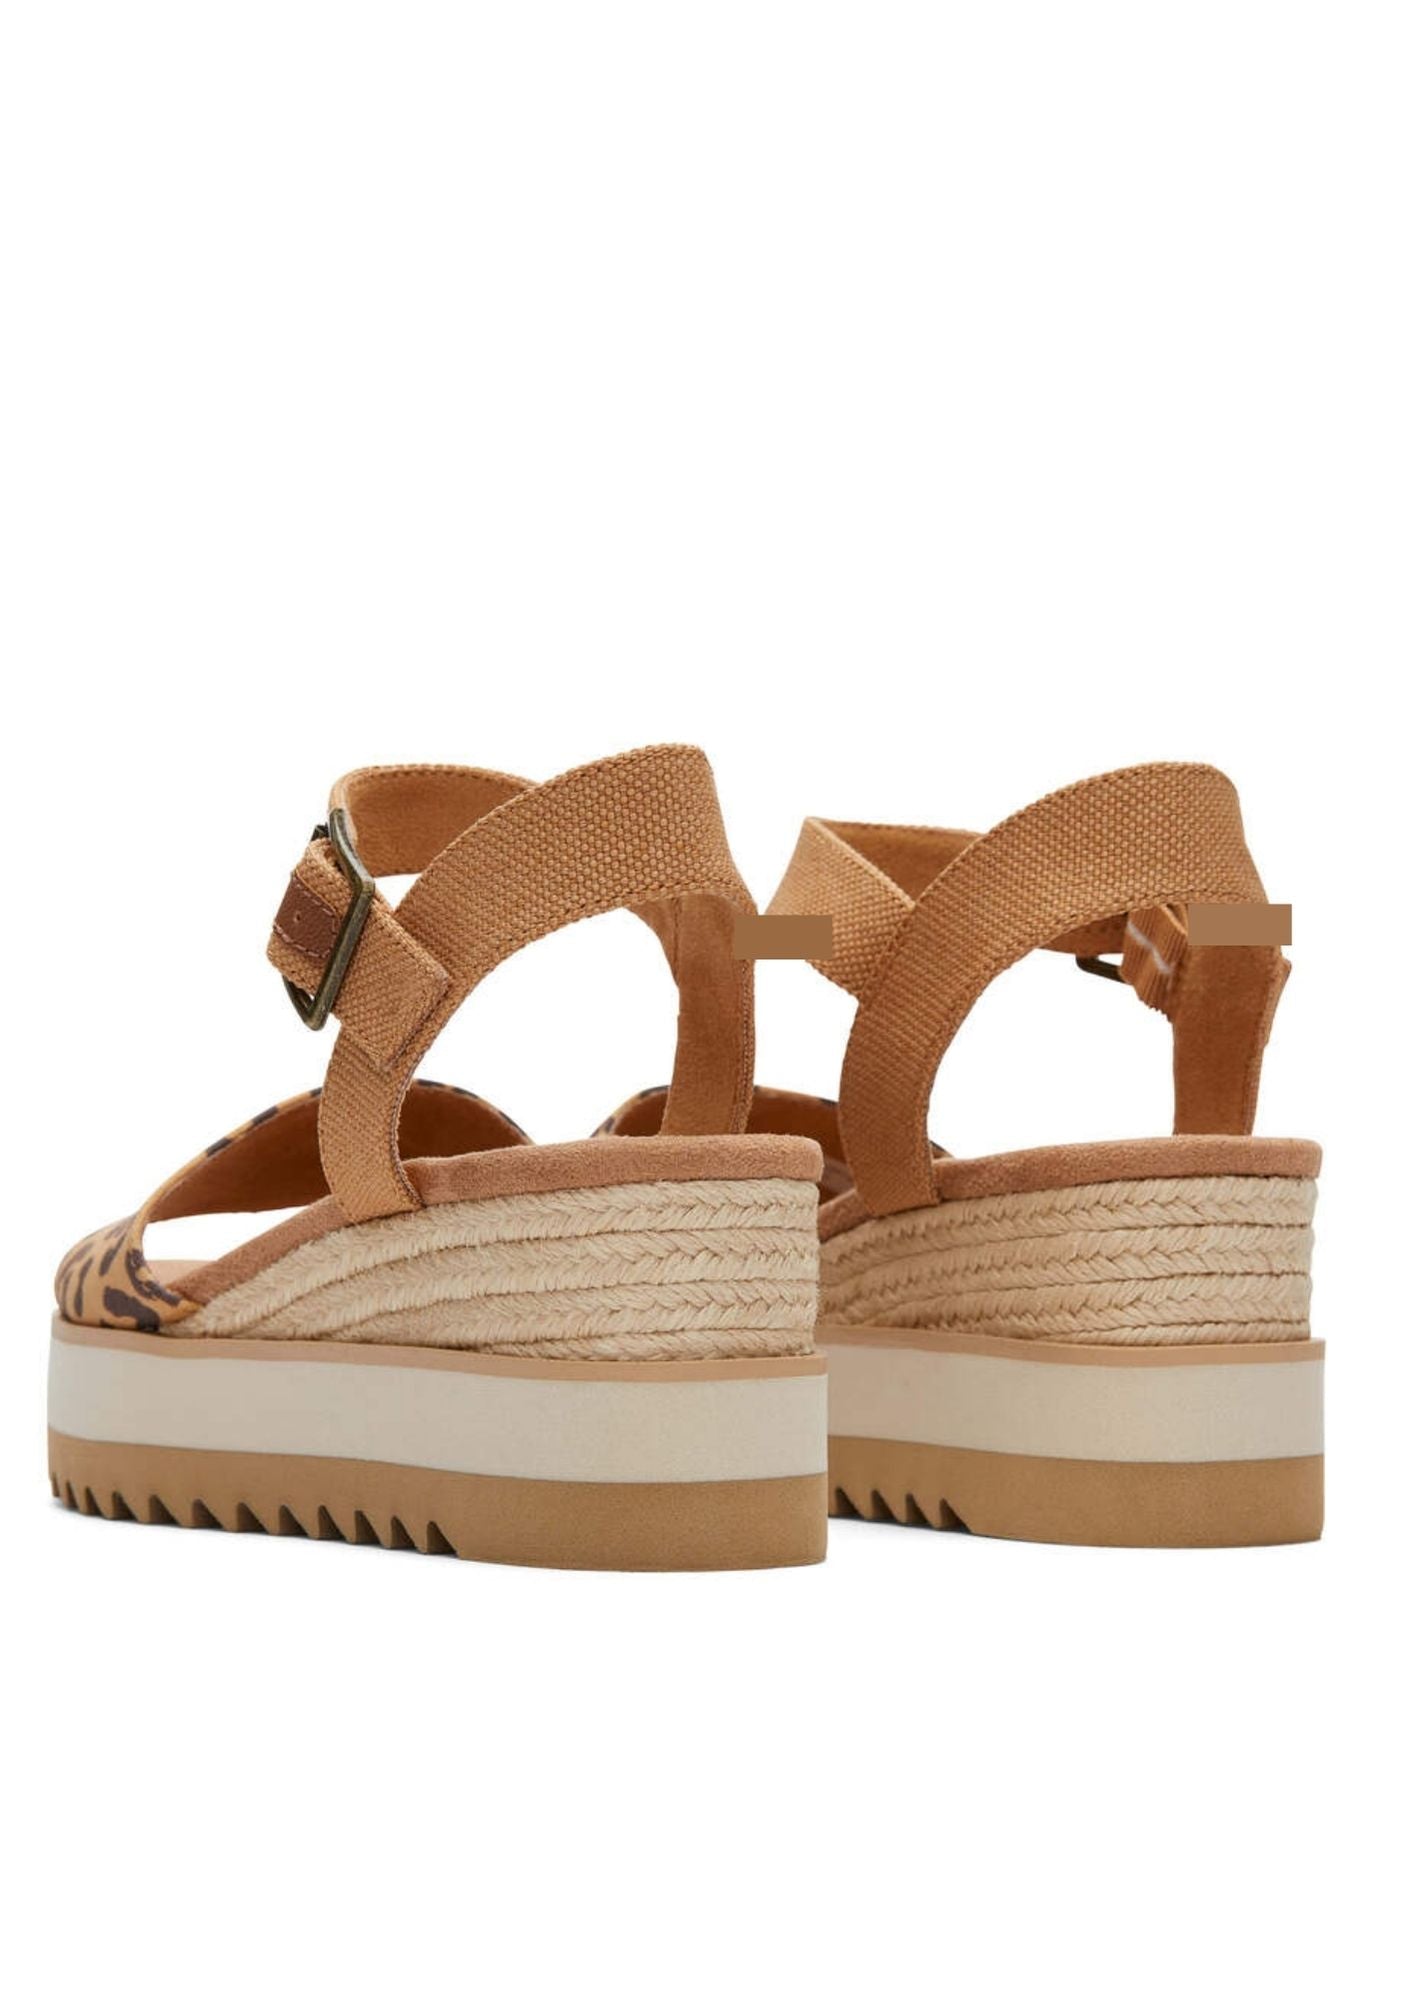 Toms® Diana Wedge Sandal Shoes Toms